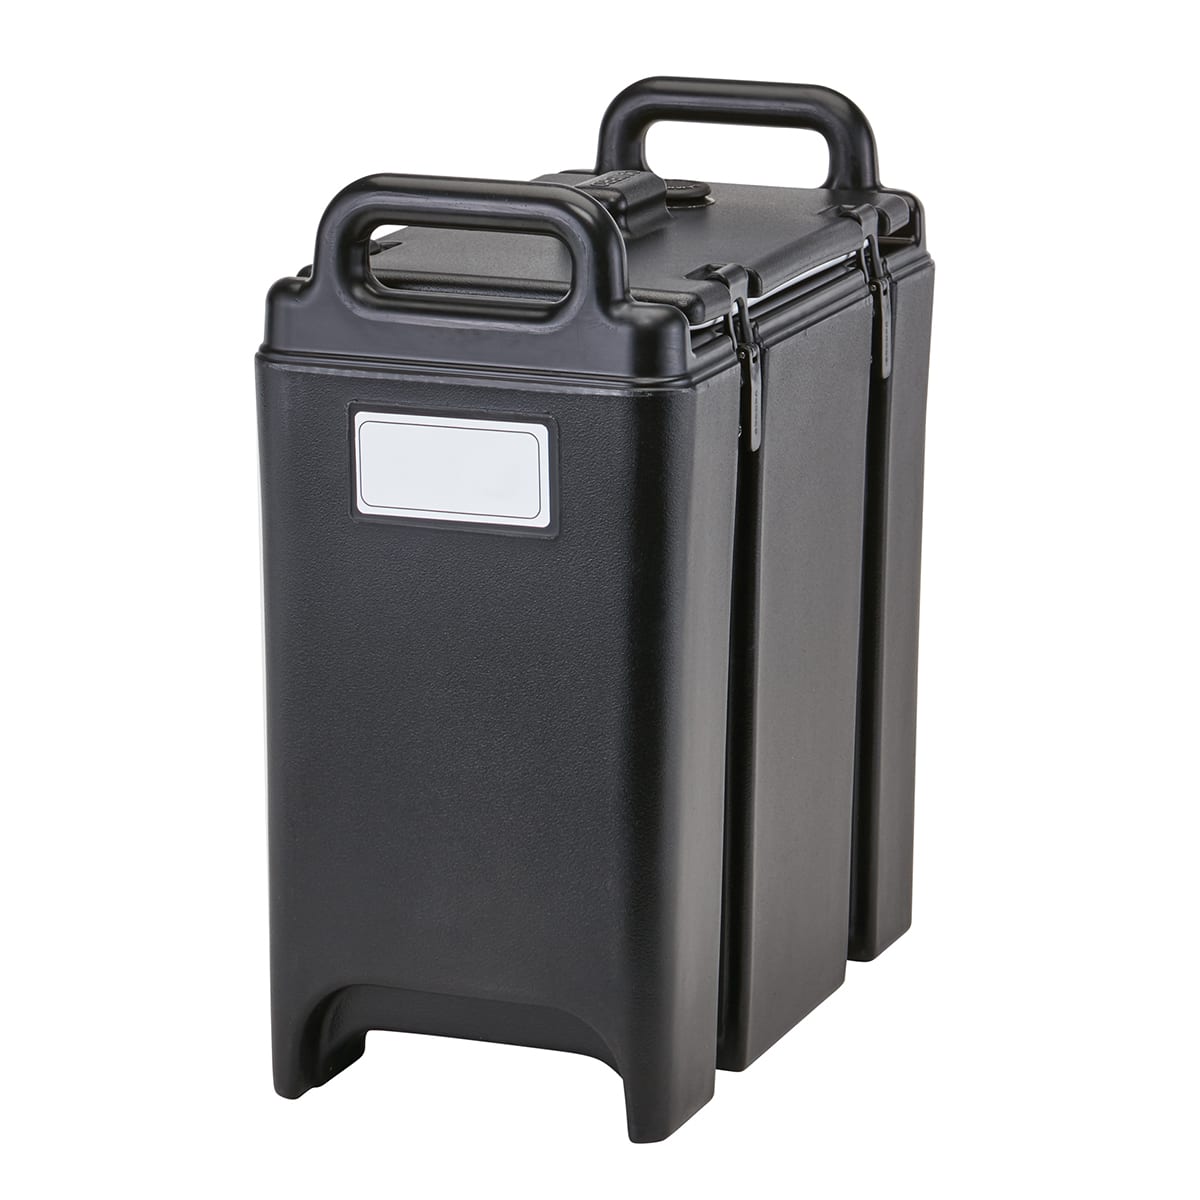 Cambro 350LCD110 Camtainer 3.375 Gallon Black Insulated Soup Carrier